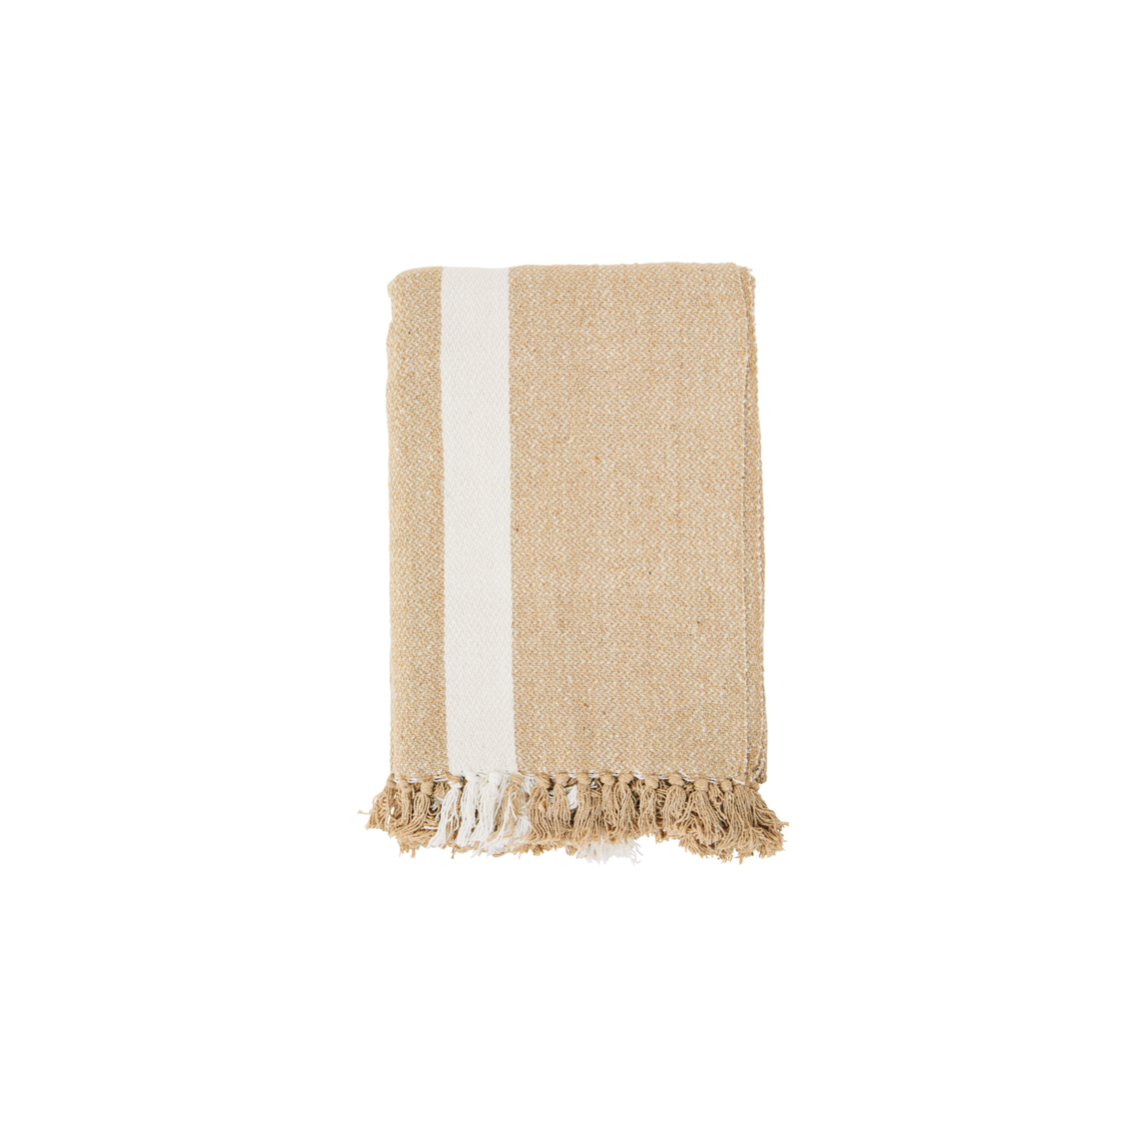 sand colour recycled cotton throw with tassel edging